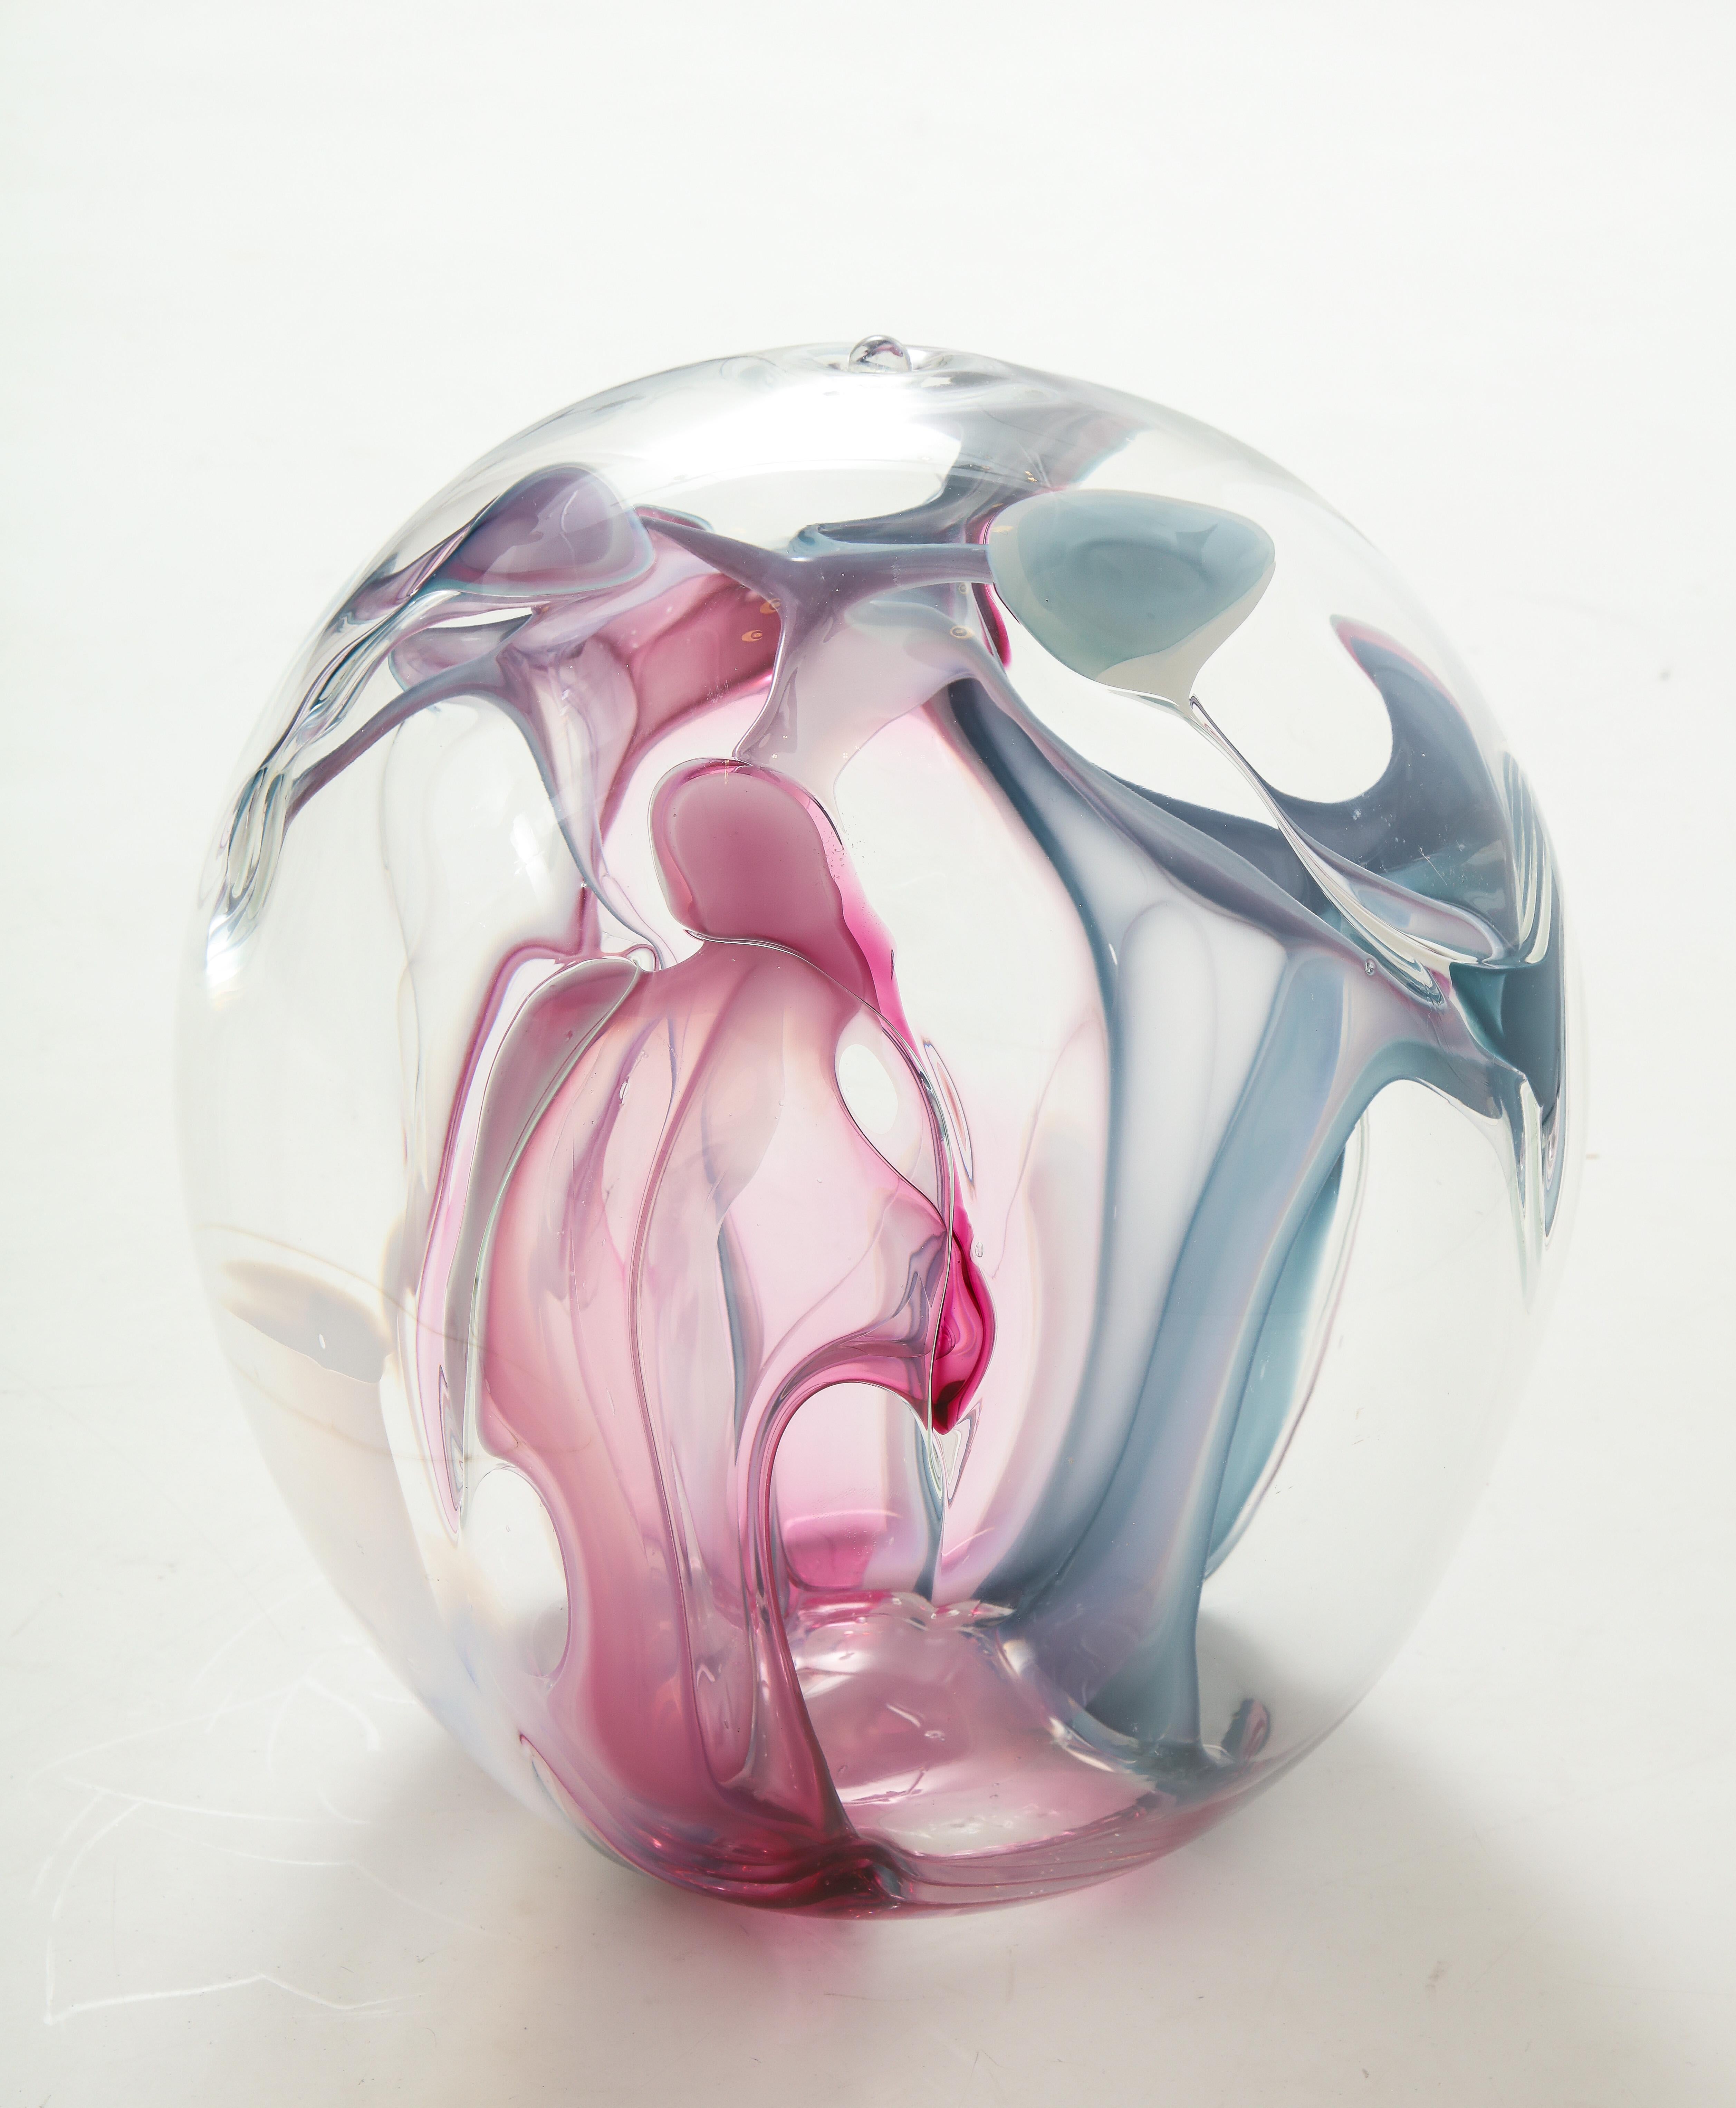 Large blown glass sculpture with internal swirling colored glass threads.
Signed and dated.